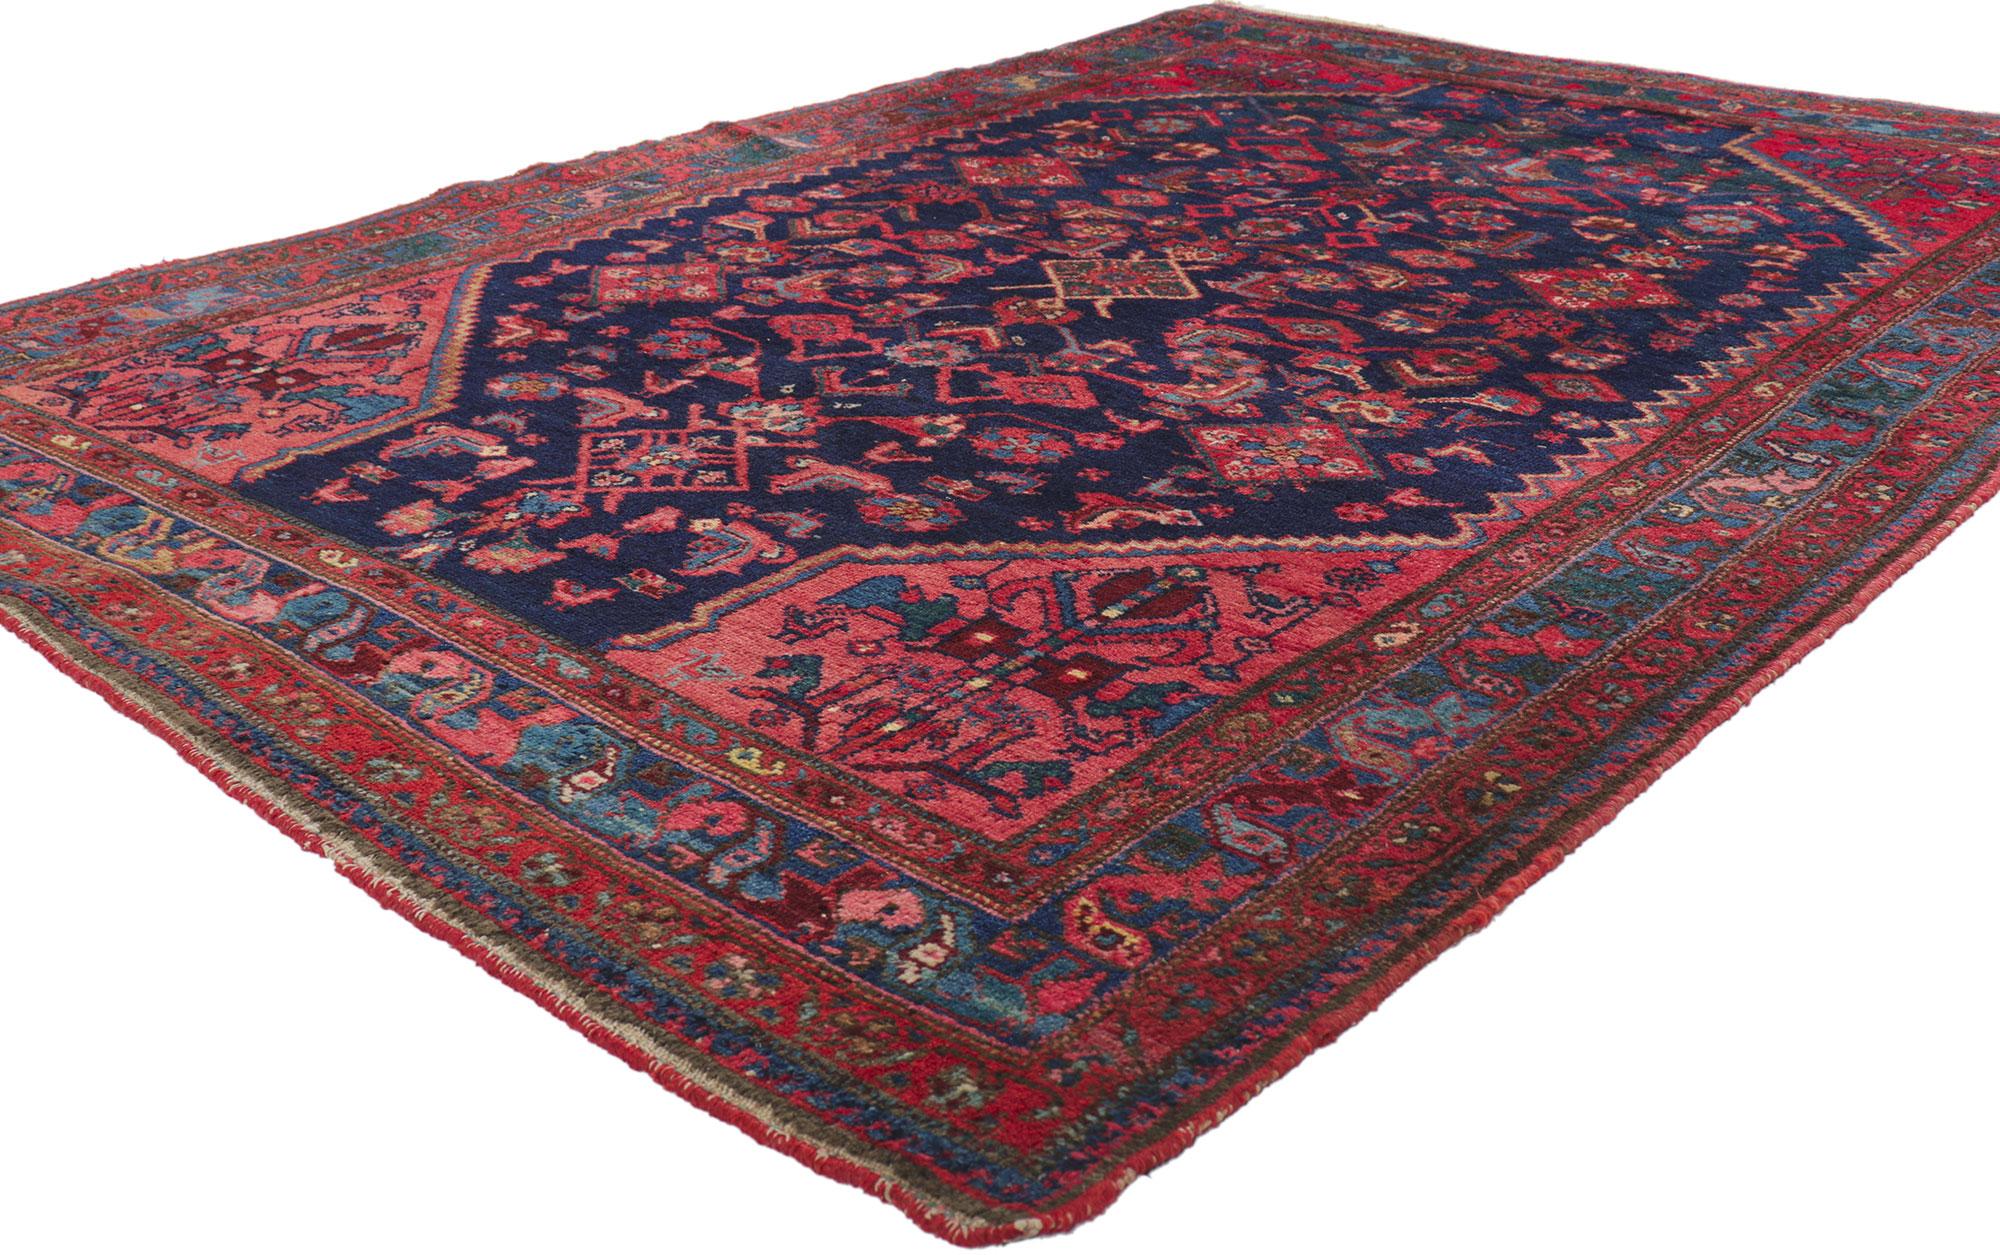 78420 Antique Persian Malayer Rug, 04'11 x 07'03. With its timeless Herati design and modern style, this hand-knotted wool antique Persian Malayer rug is poised to impress. The eye-catching allover pattern and saturated color palette woven into this